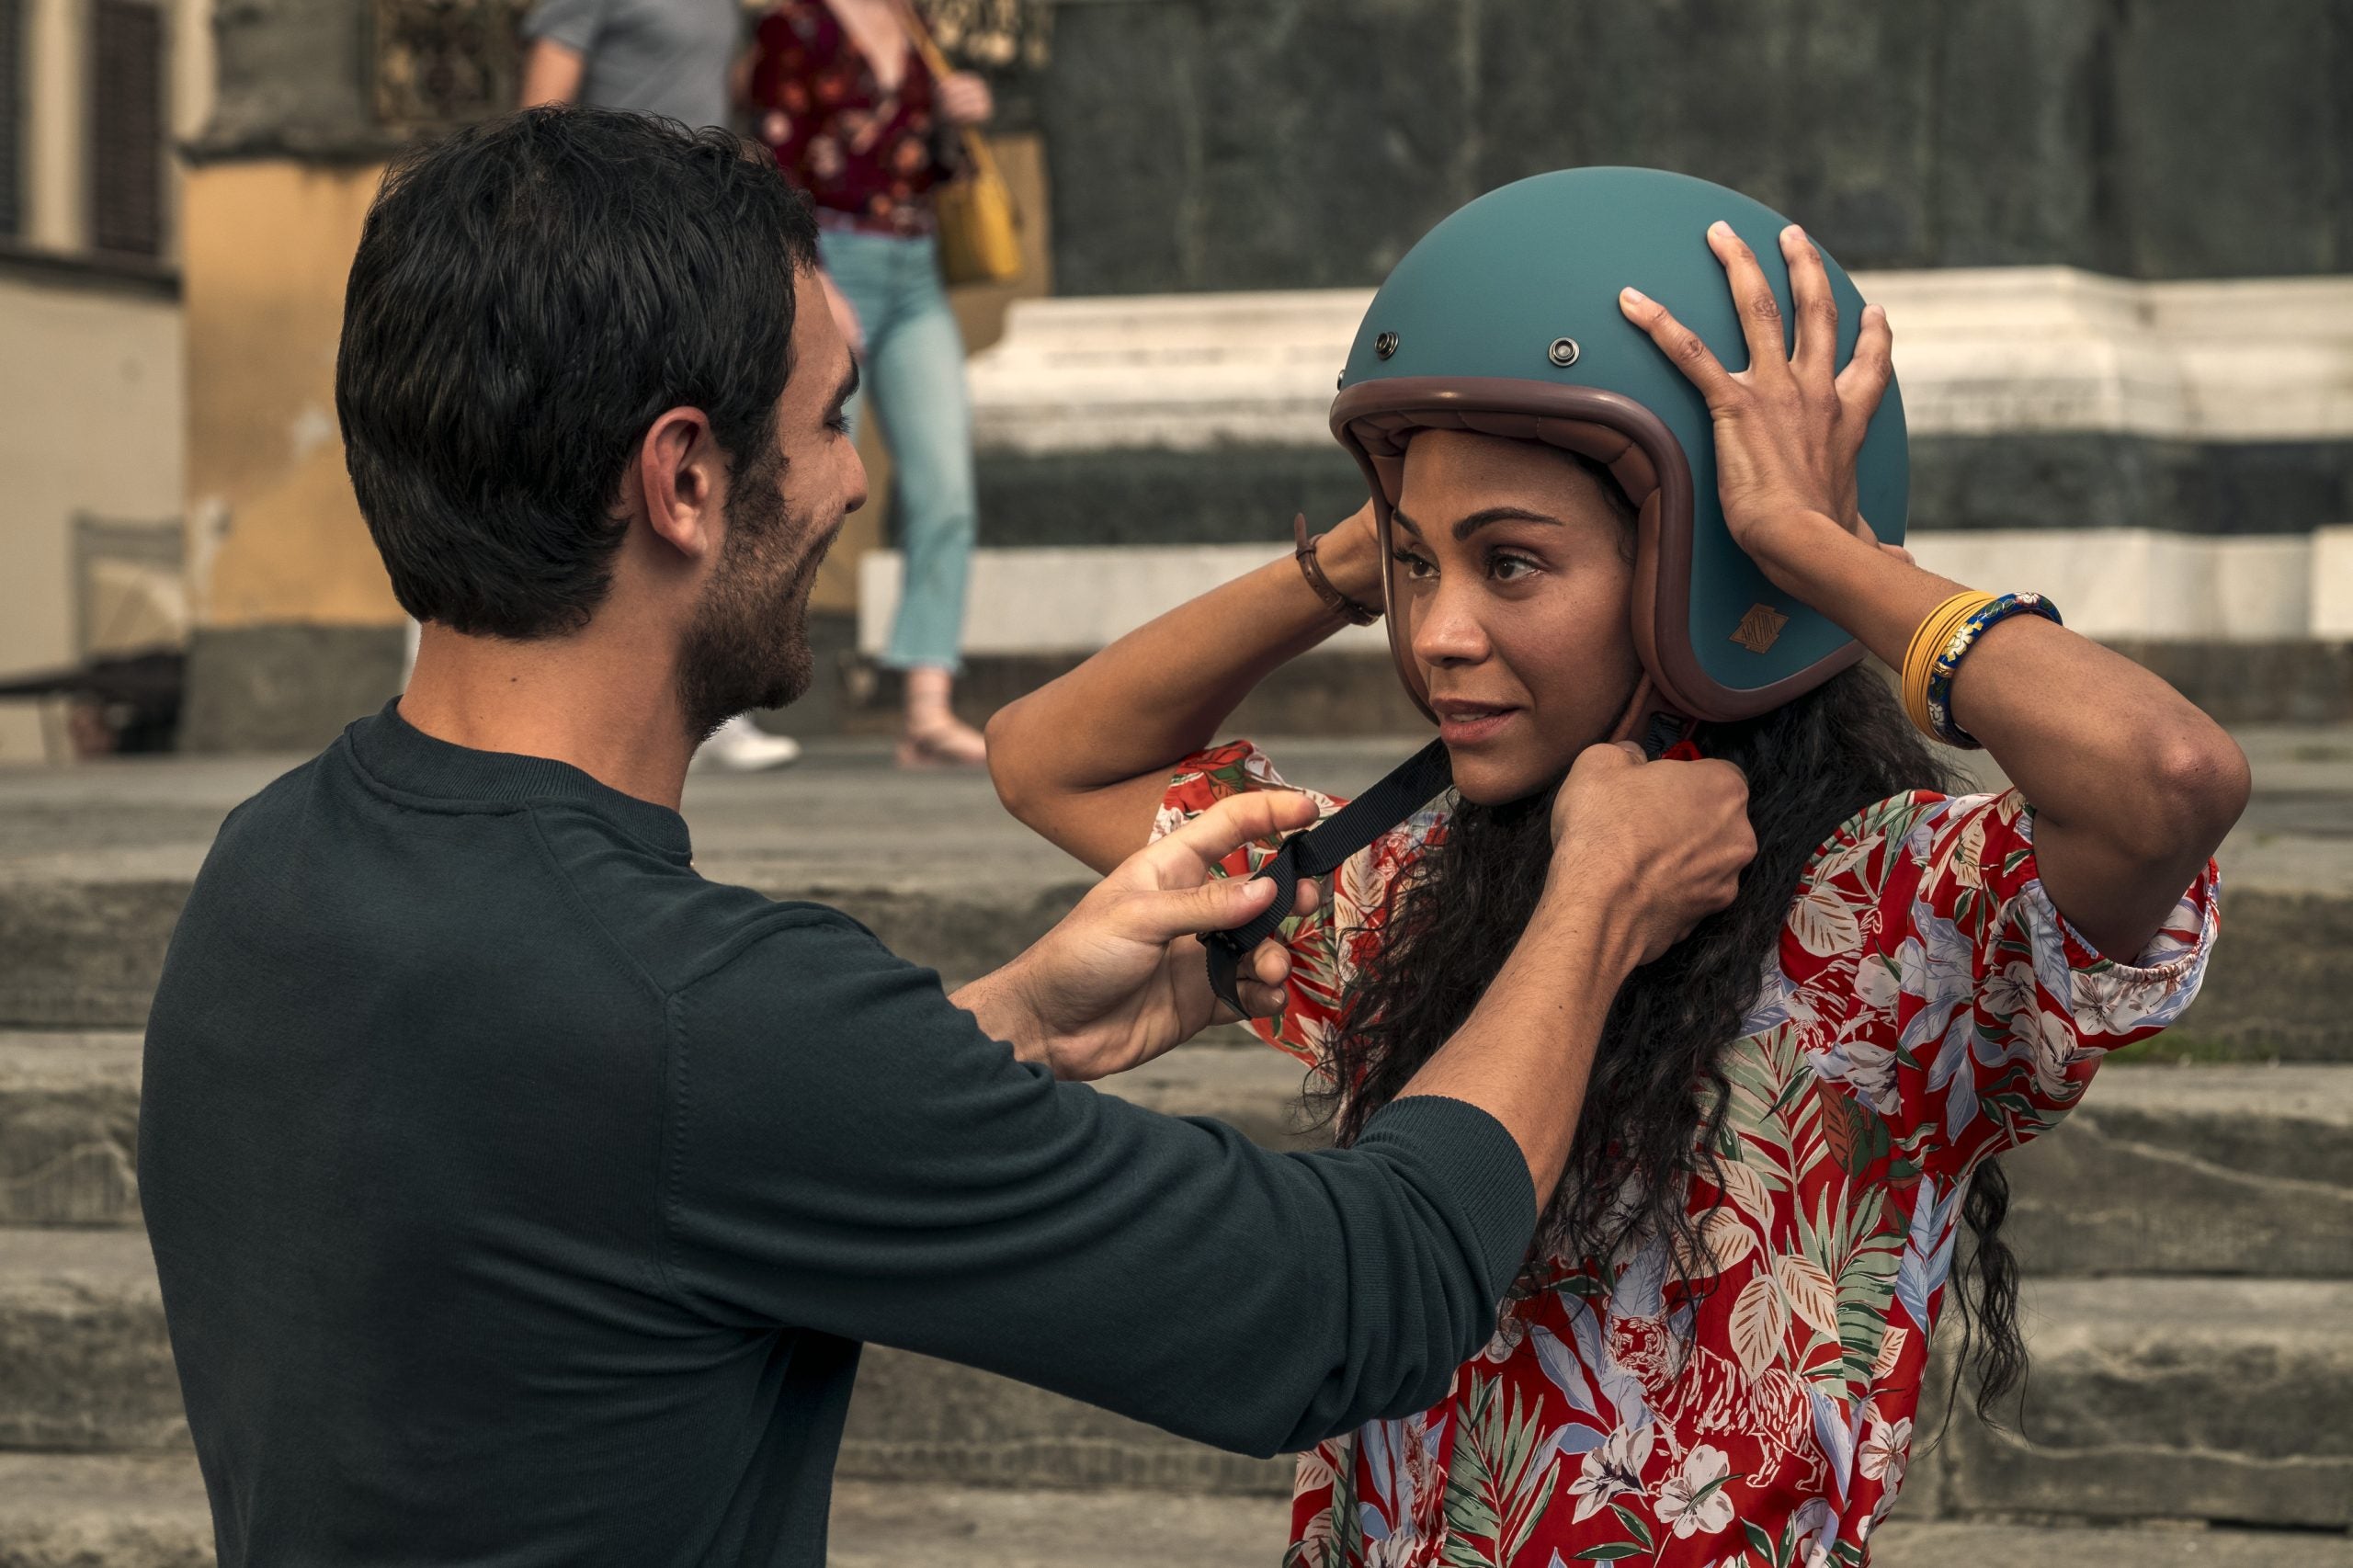 ‘From Scratch:’ Netflix’s Adapted Series Romanticizes Borderless Love, Family Unity & Healing Through Loss